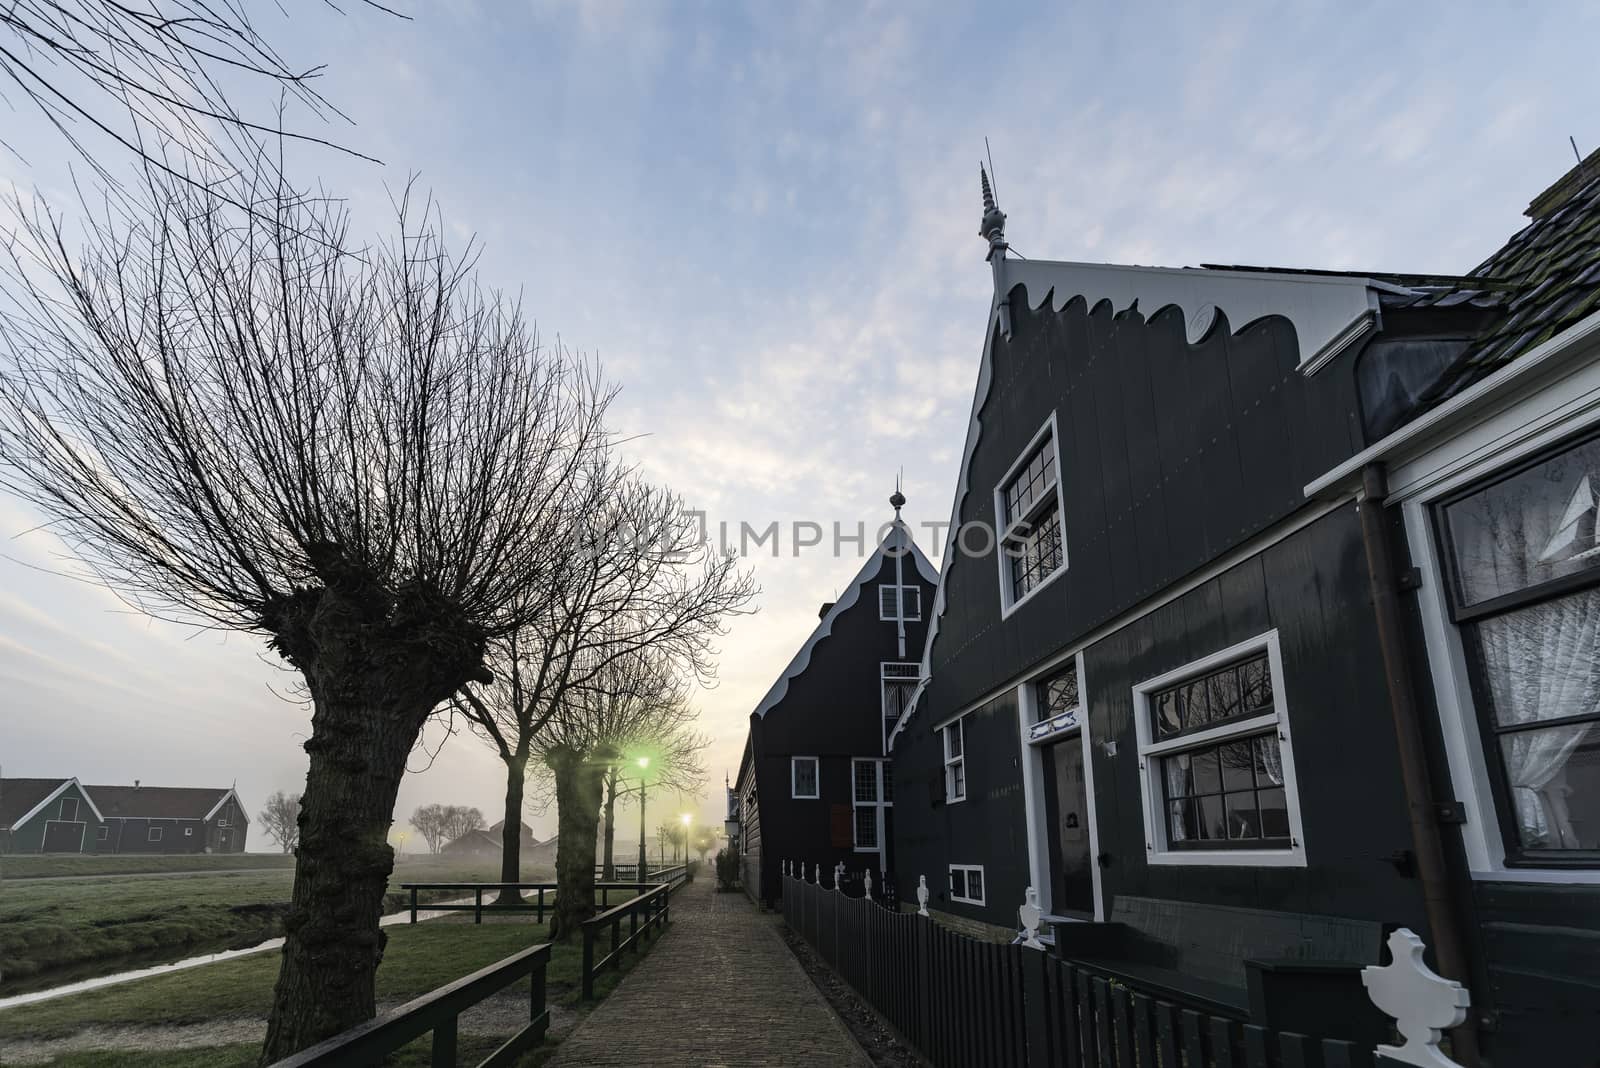 Hanging lamppost Beautiful typical Dutch wooden houses architecture at the sunrise moment mirrored on the calm canal of Zaanse Schans located in the North of Amsterdam, Netherlands by ankorlight